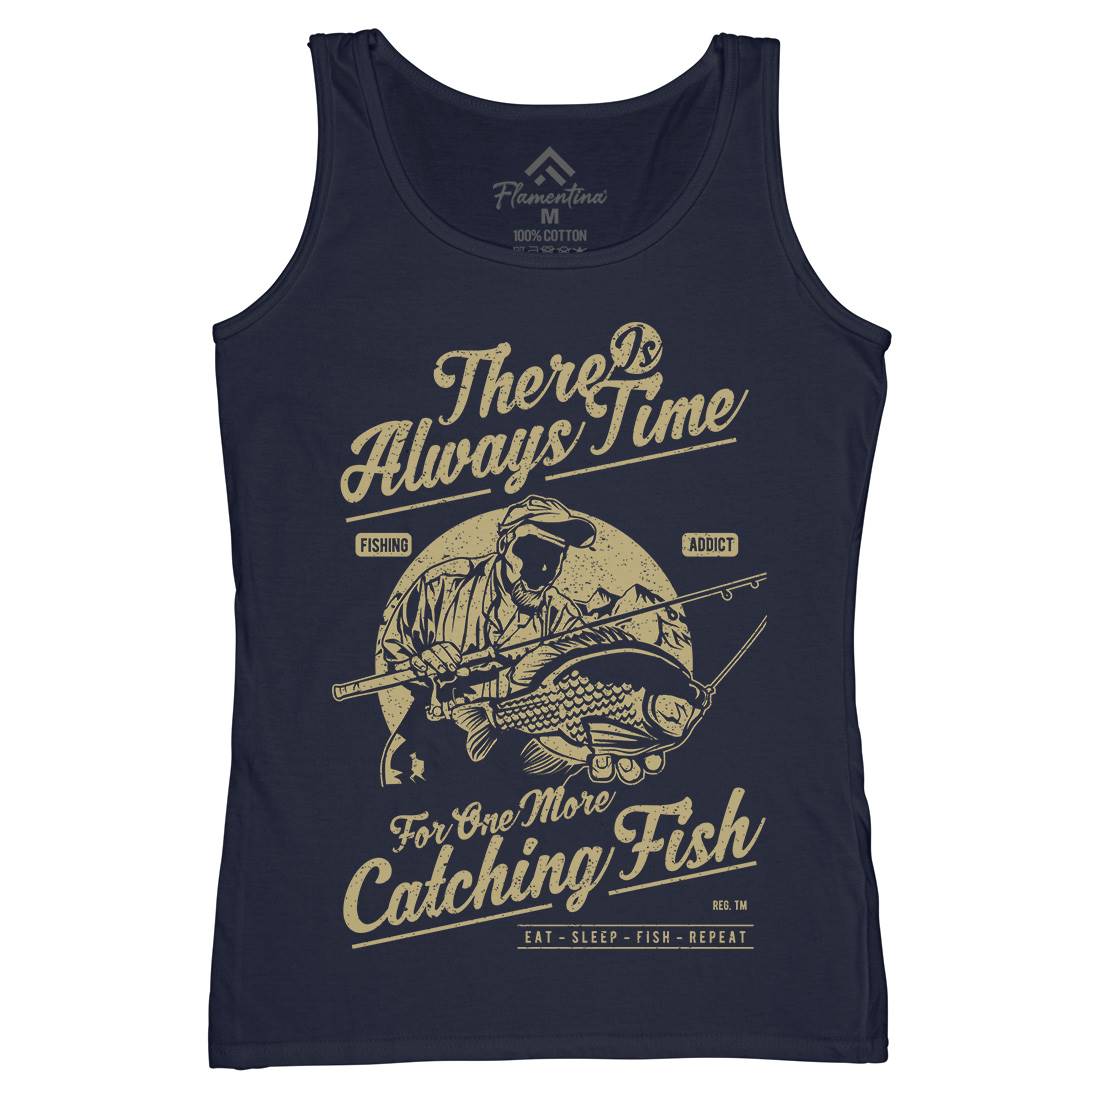 One More Catching Womens Organic Tank Top Vest Fishing A731